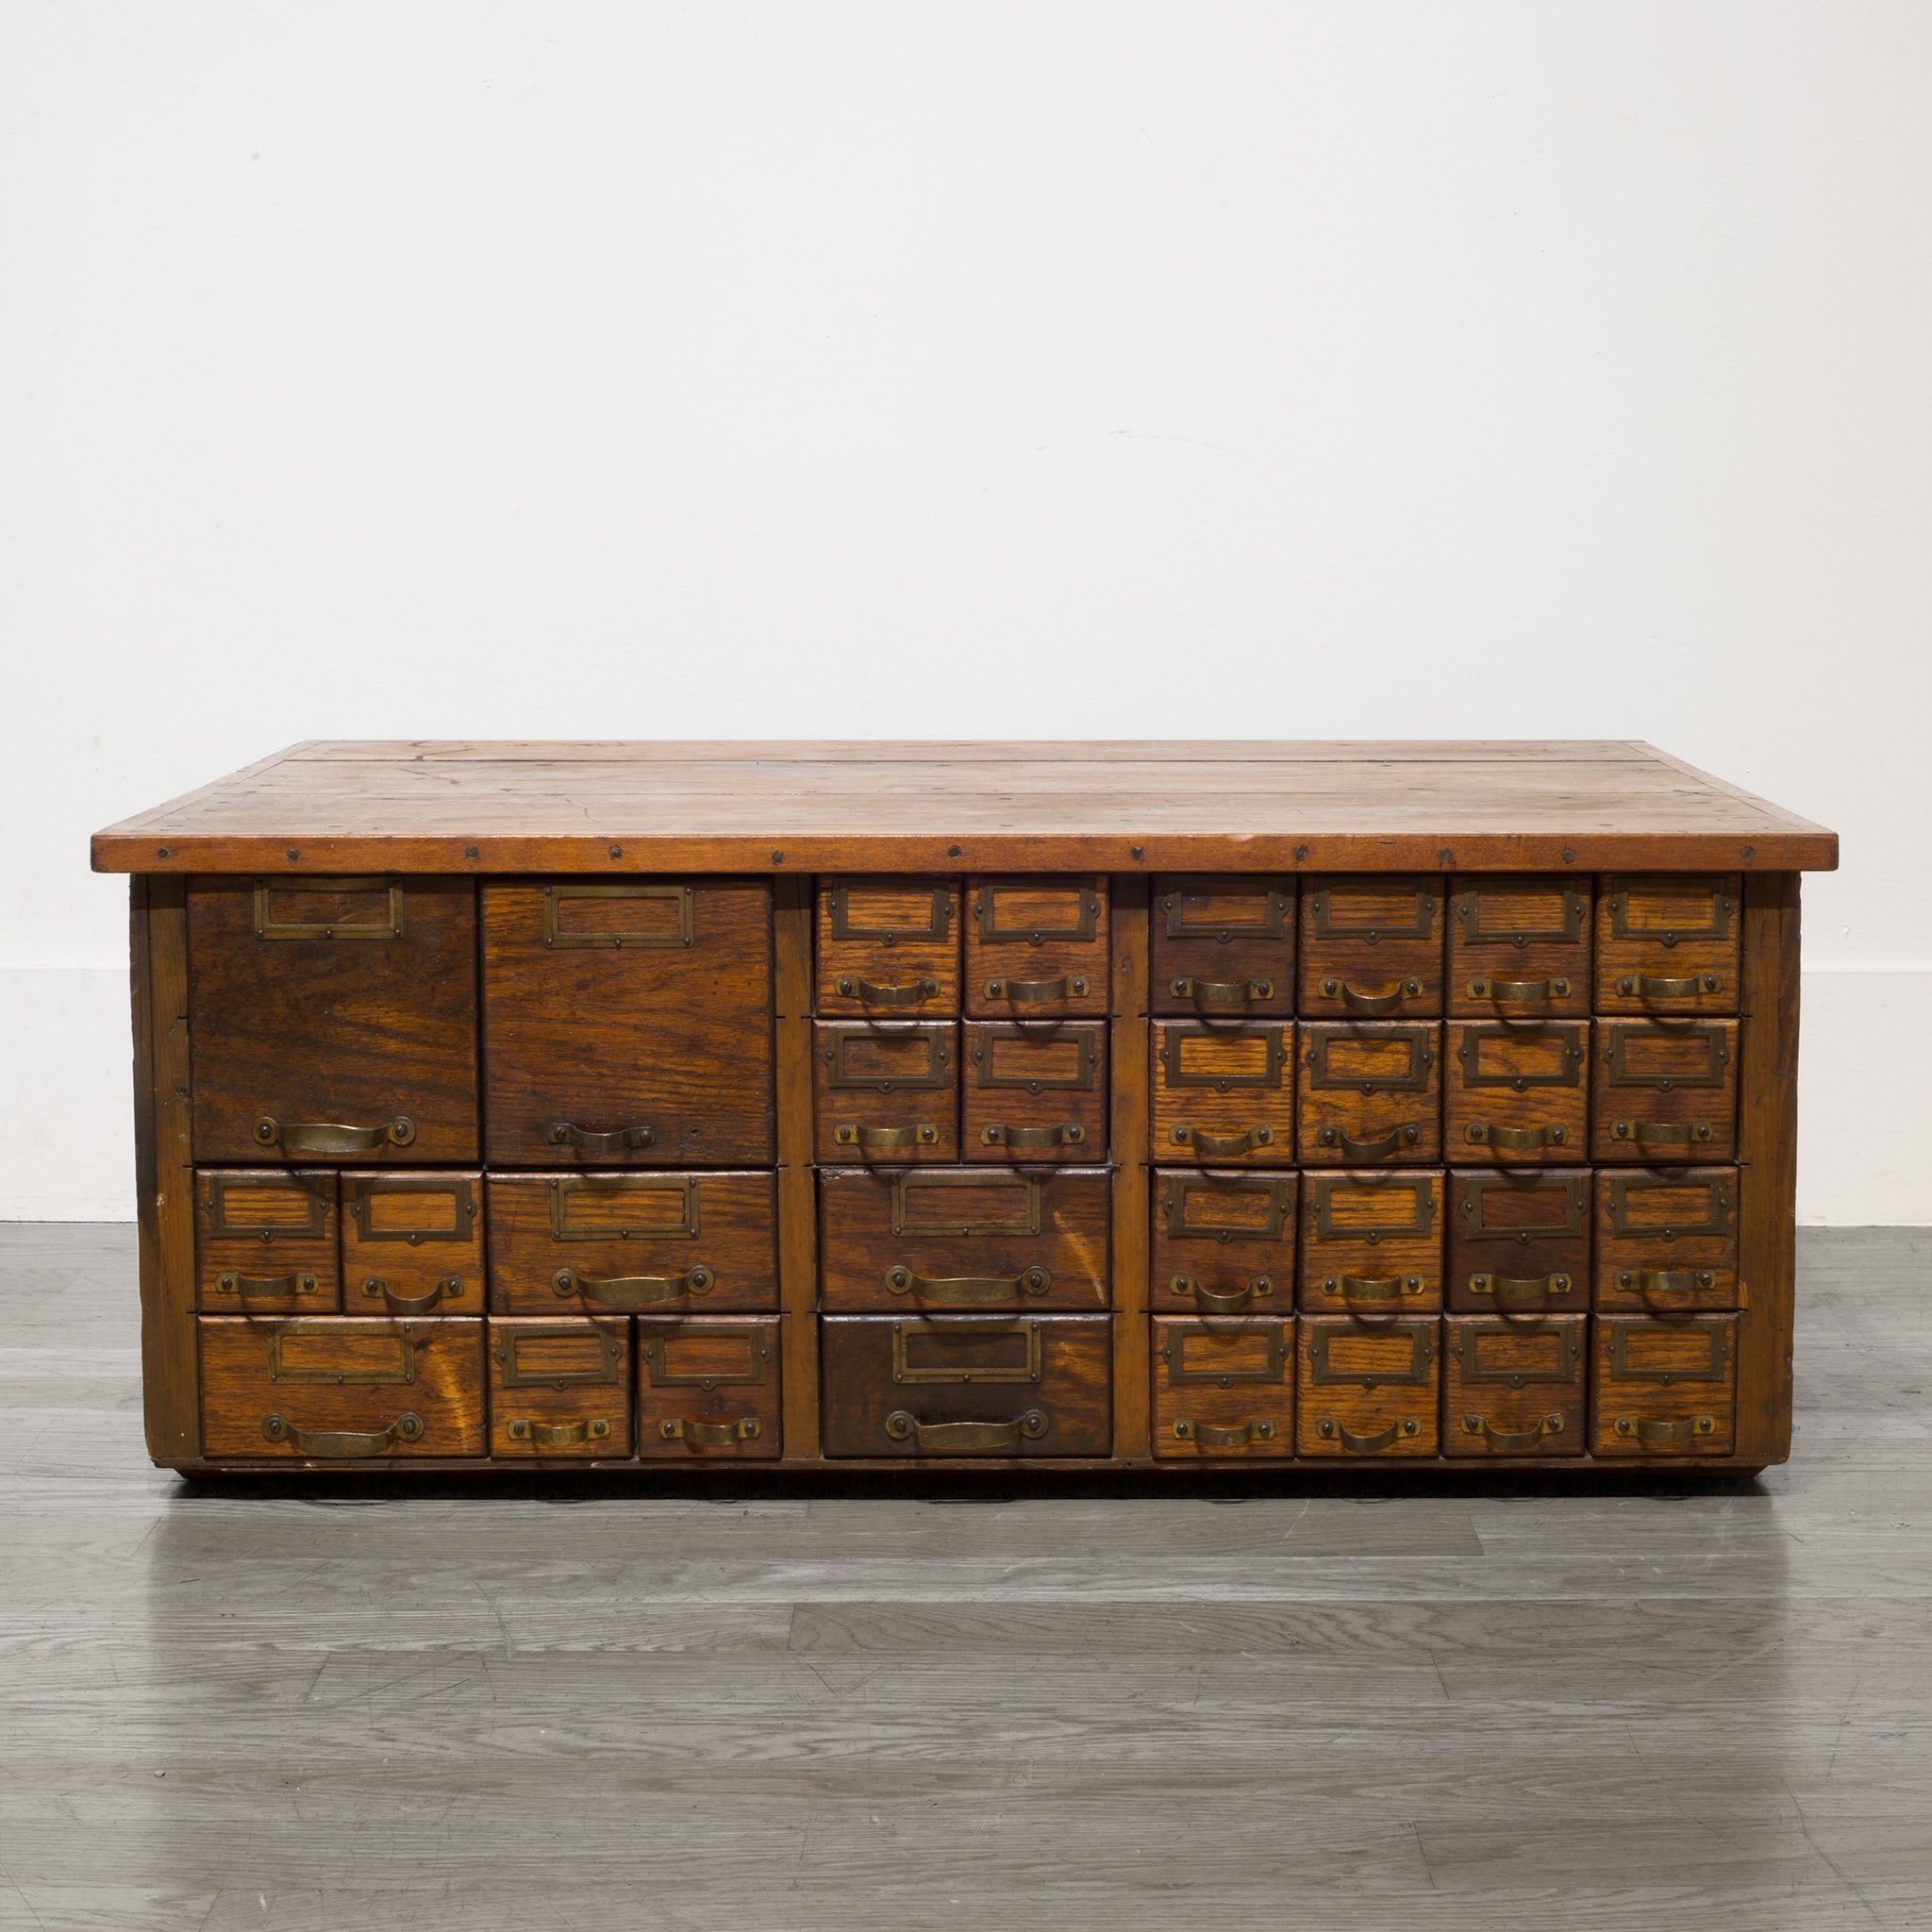 Spanish Antique Apothecary Cabinet, ca. 1800s with Original Bottles –  Antiquities Warehouse